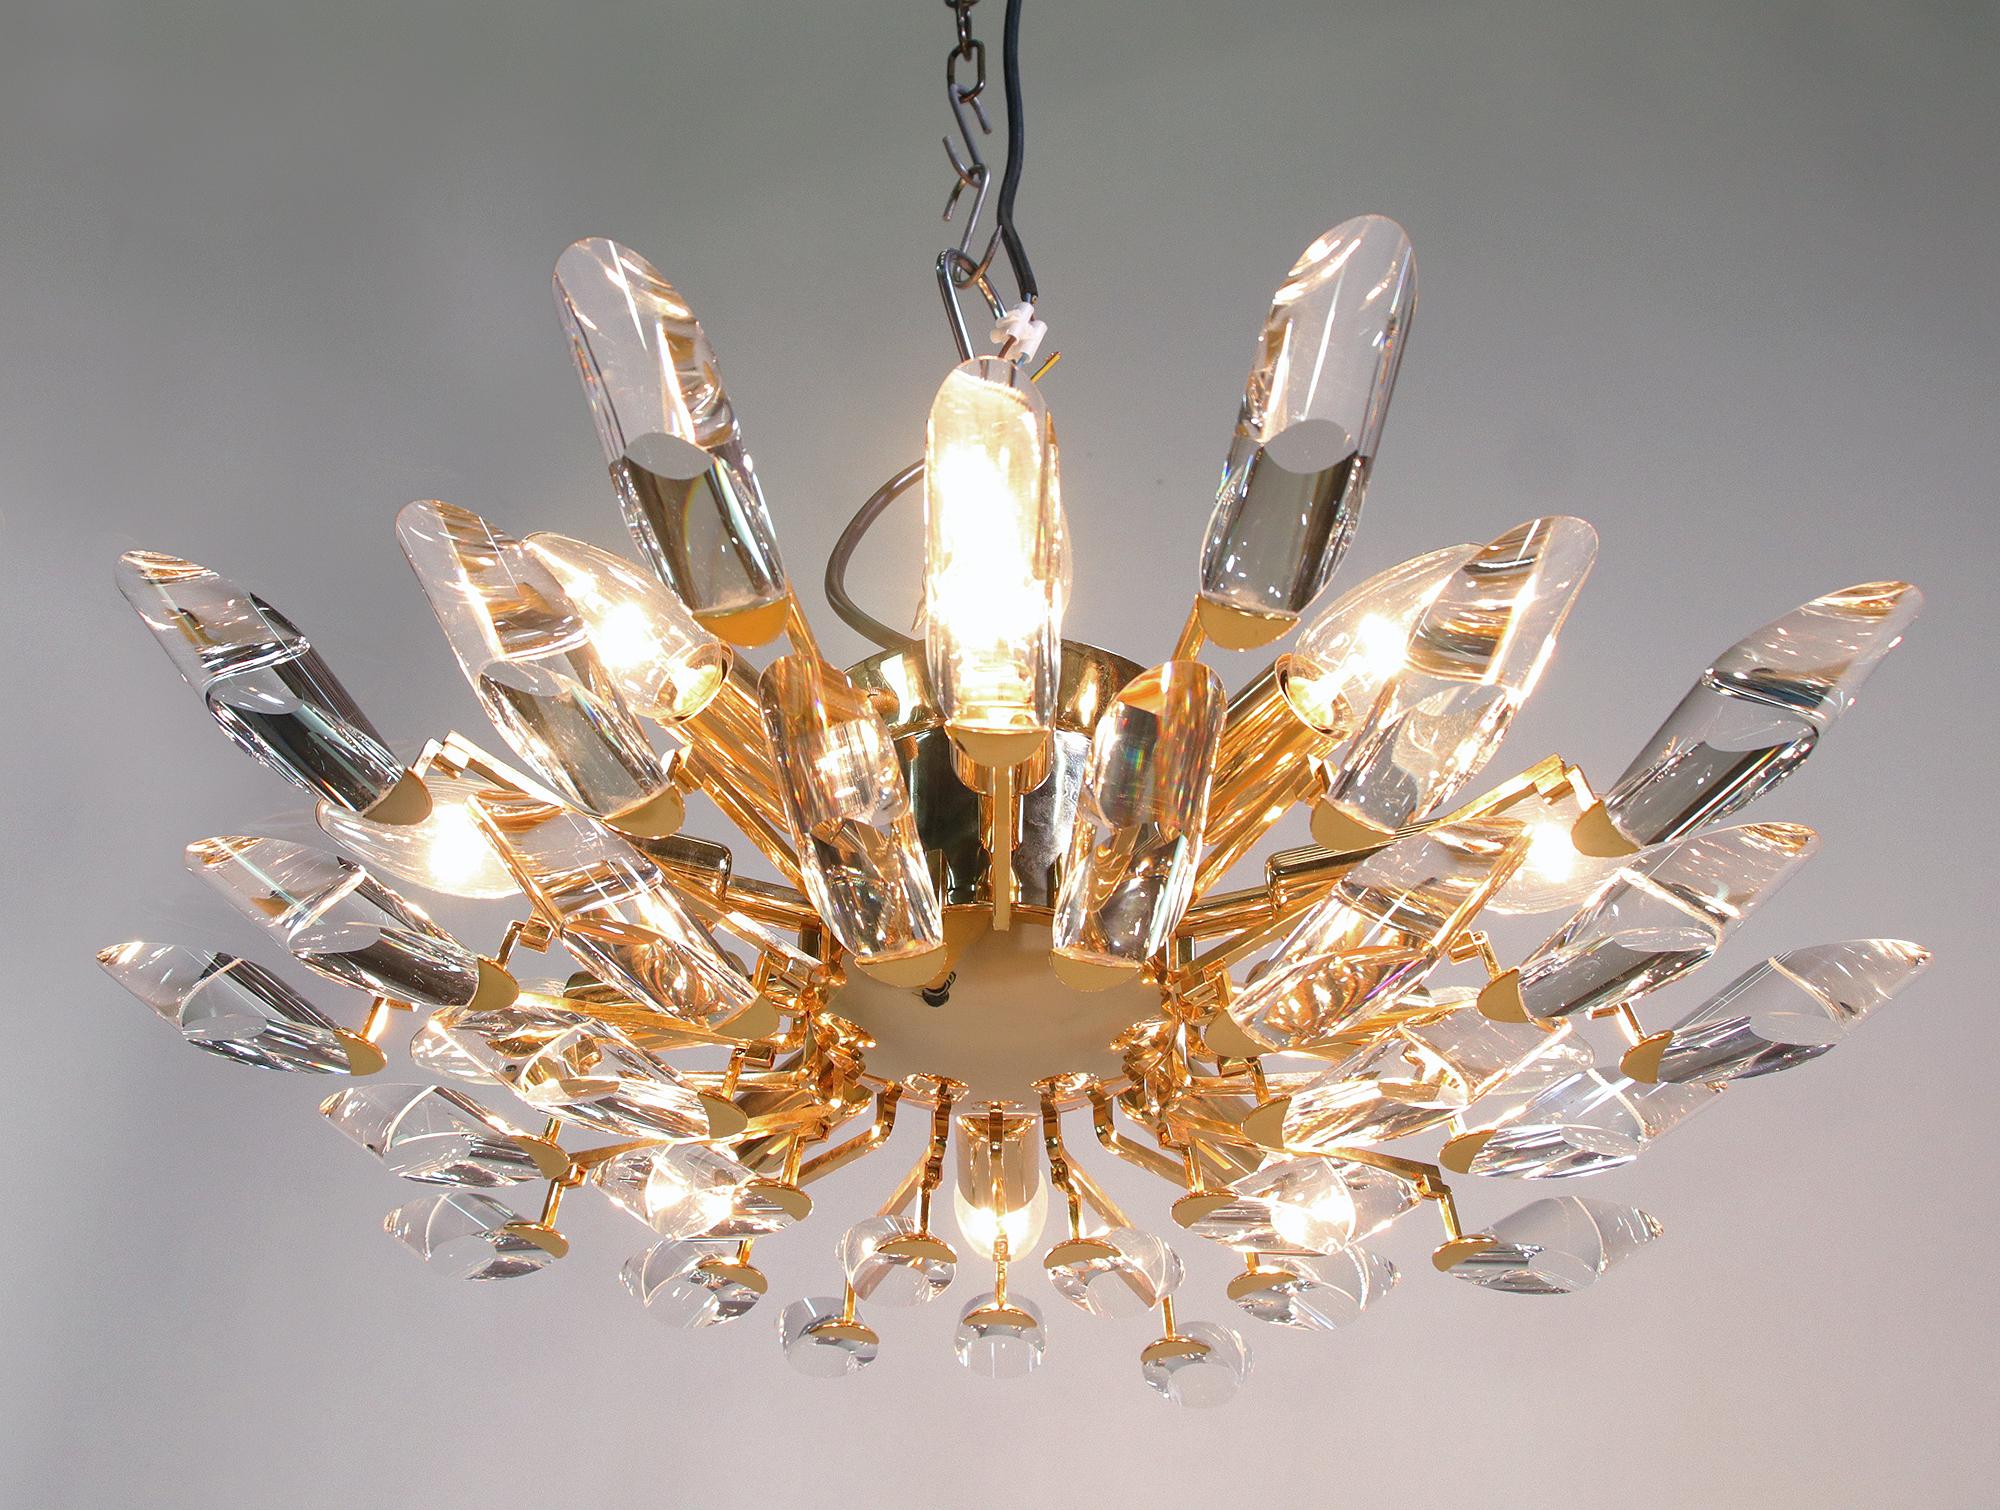 Elegant ceiling lamp with crystal glass on a gold-plated brass frame. Chandelier illuminates beautifully and offers a lot of light. Gem from the time. With this light you make a clear statement in your interior design. A real eye-catcher even unlit.